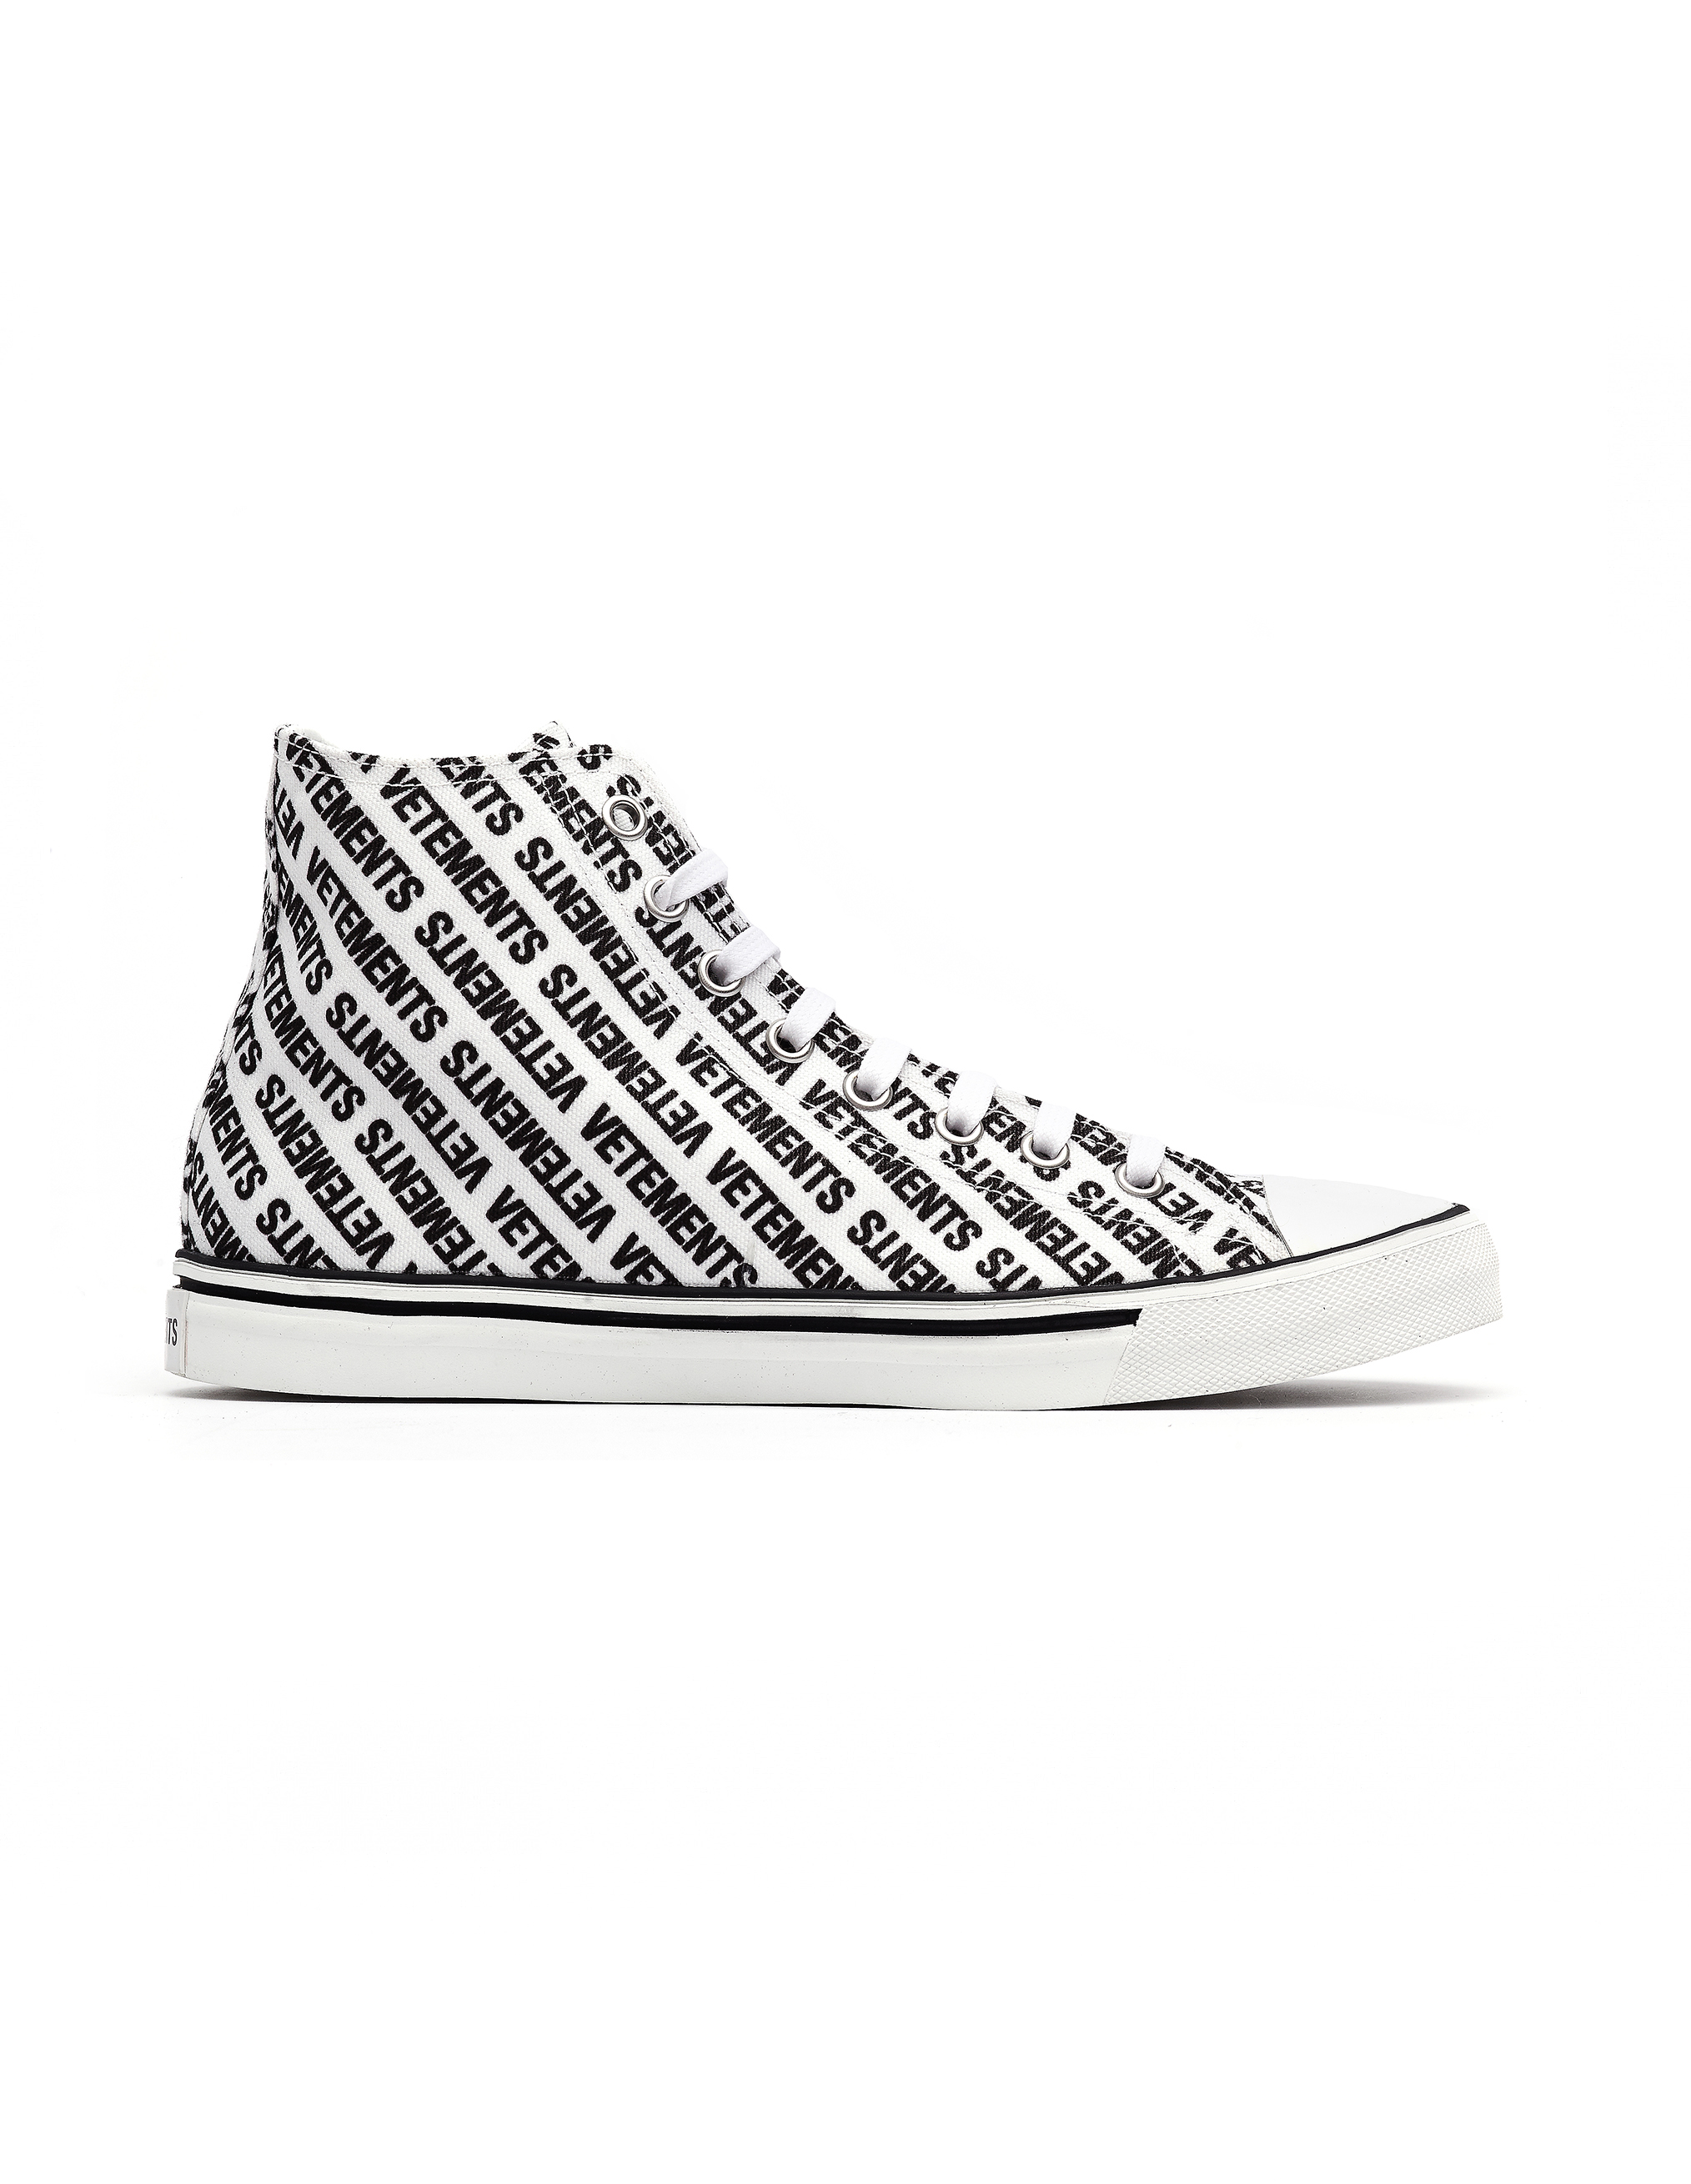 Vetements | White Logo Printed Converse Sneakers | SVMOSCOW.COM